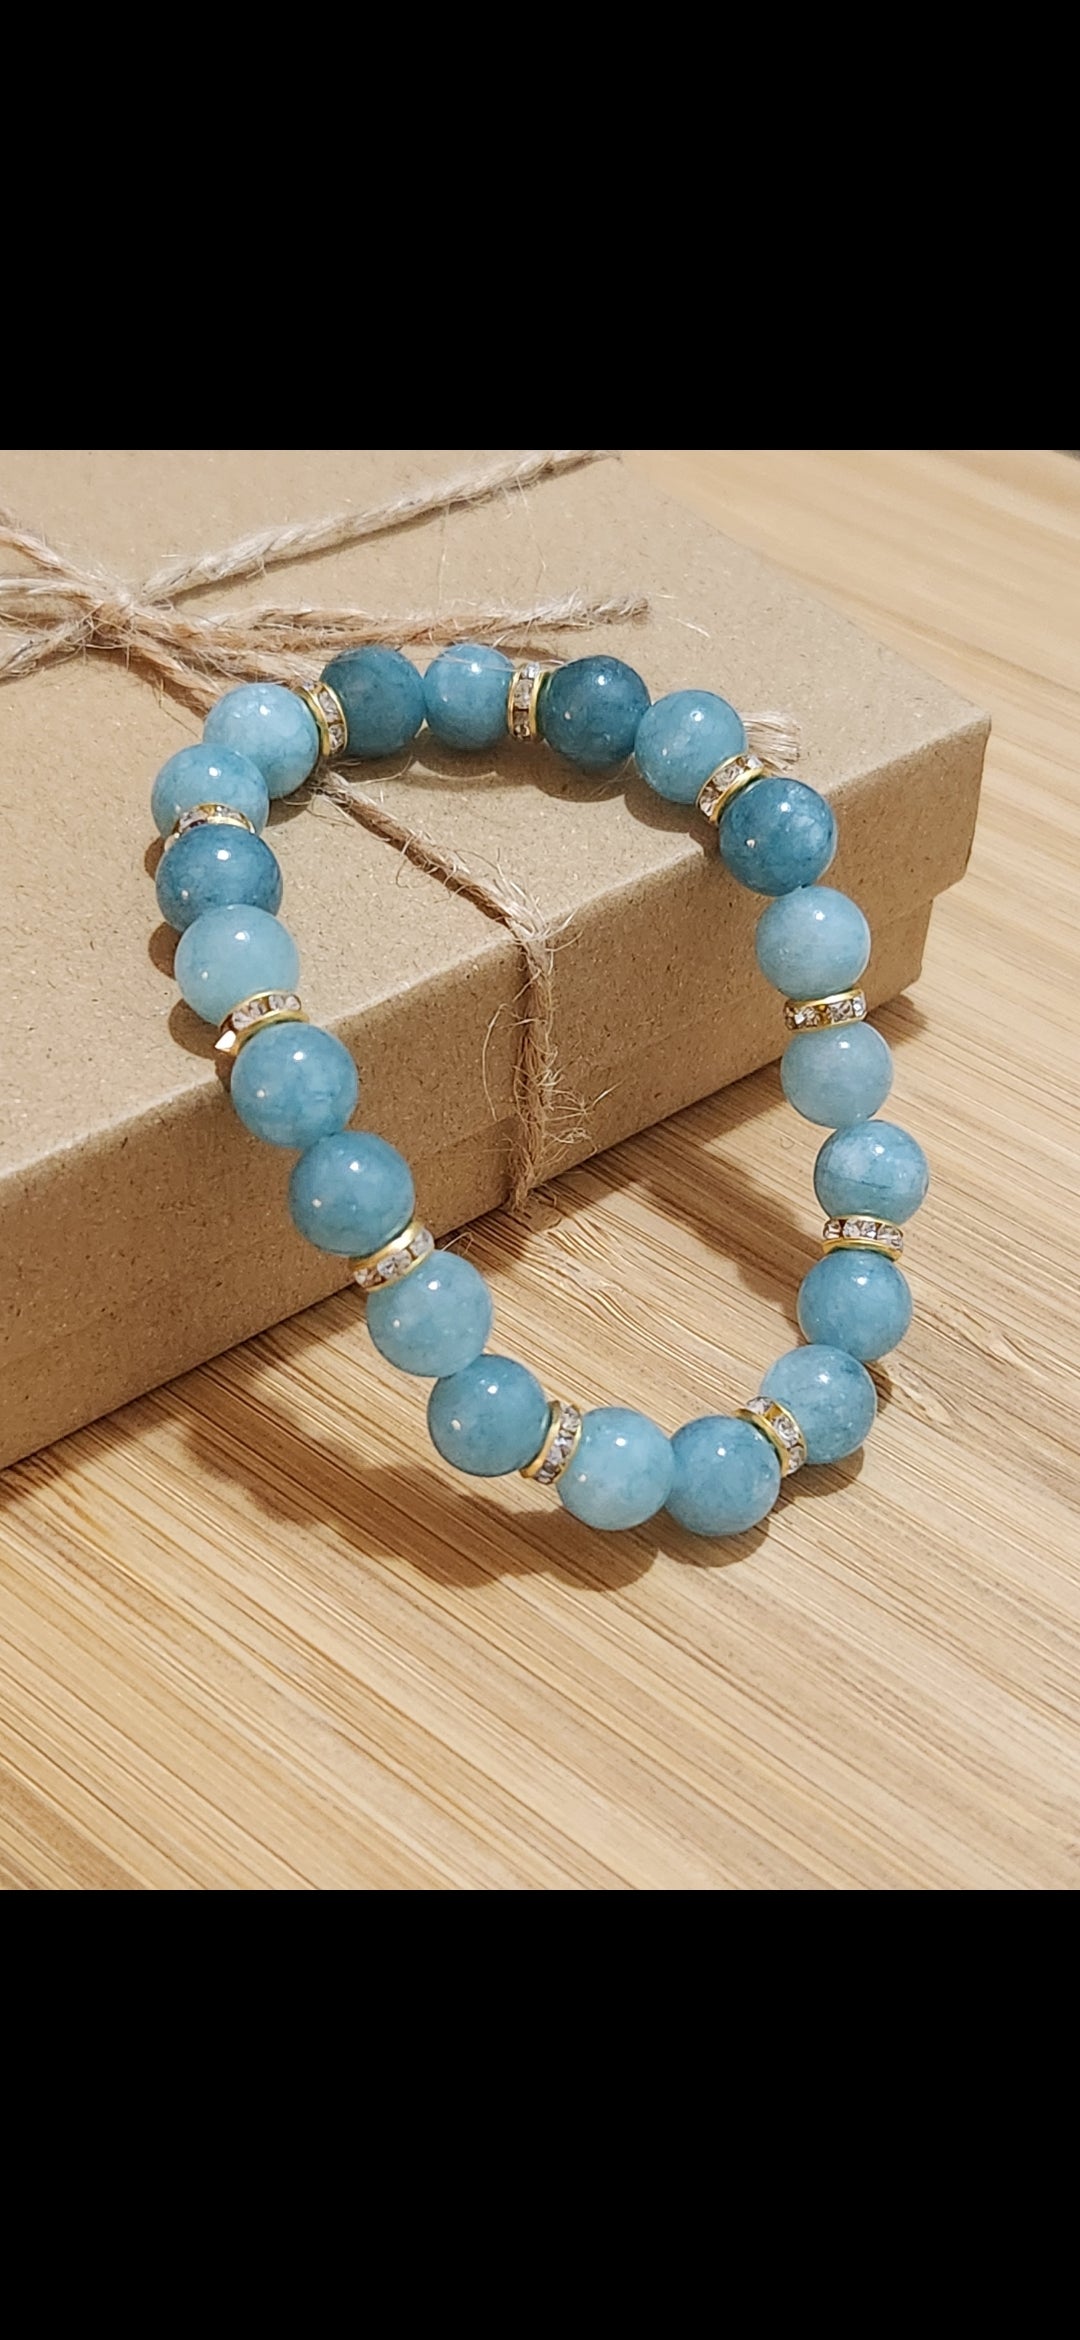 Aquamarine Stone beaded bracelet with sparkle accents - peace - courage - healing